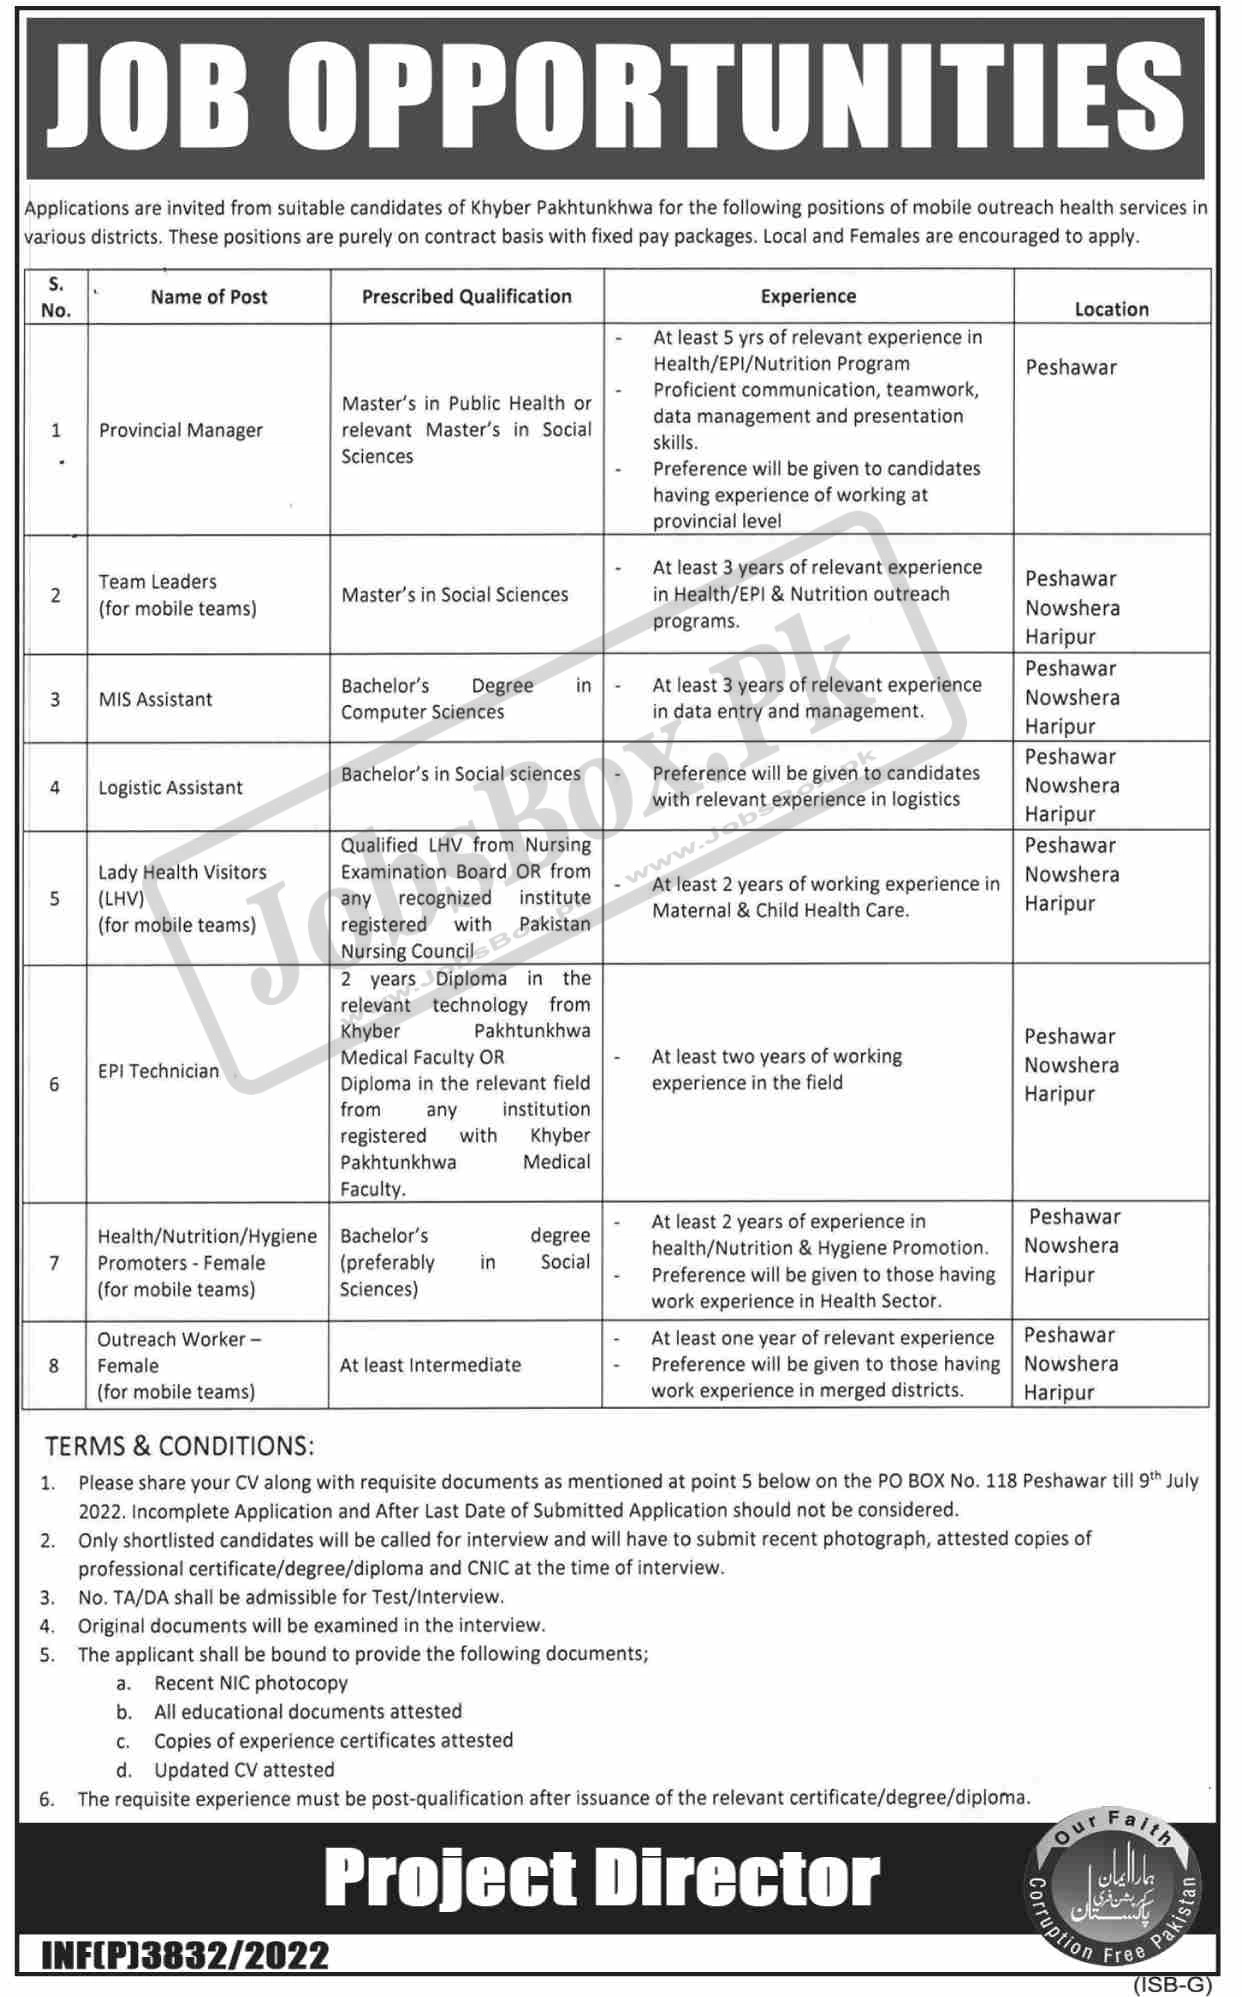 National Organization Jobs 2022 in Health Projects in KPK - PO Box 118